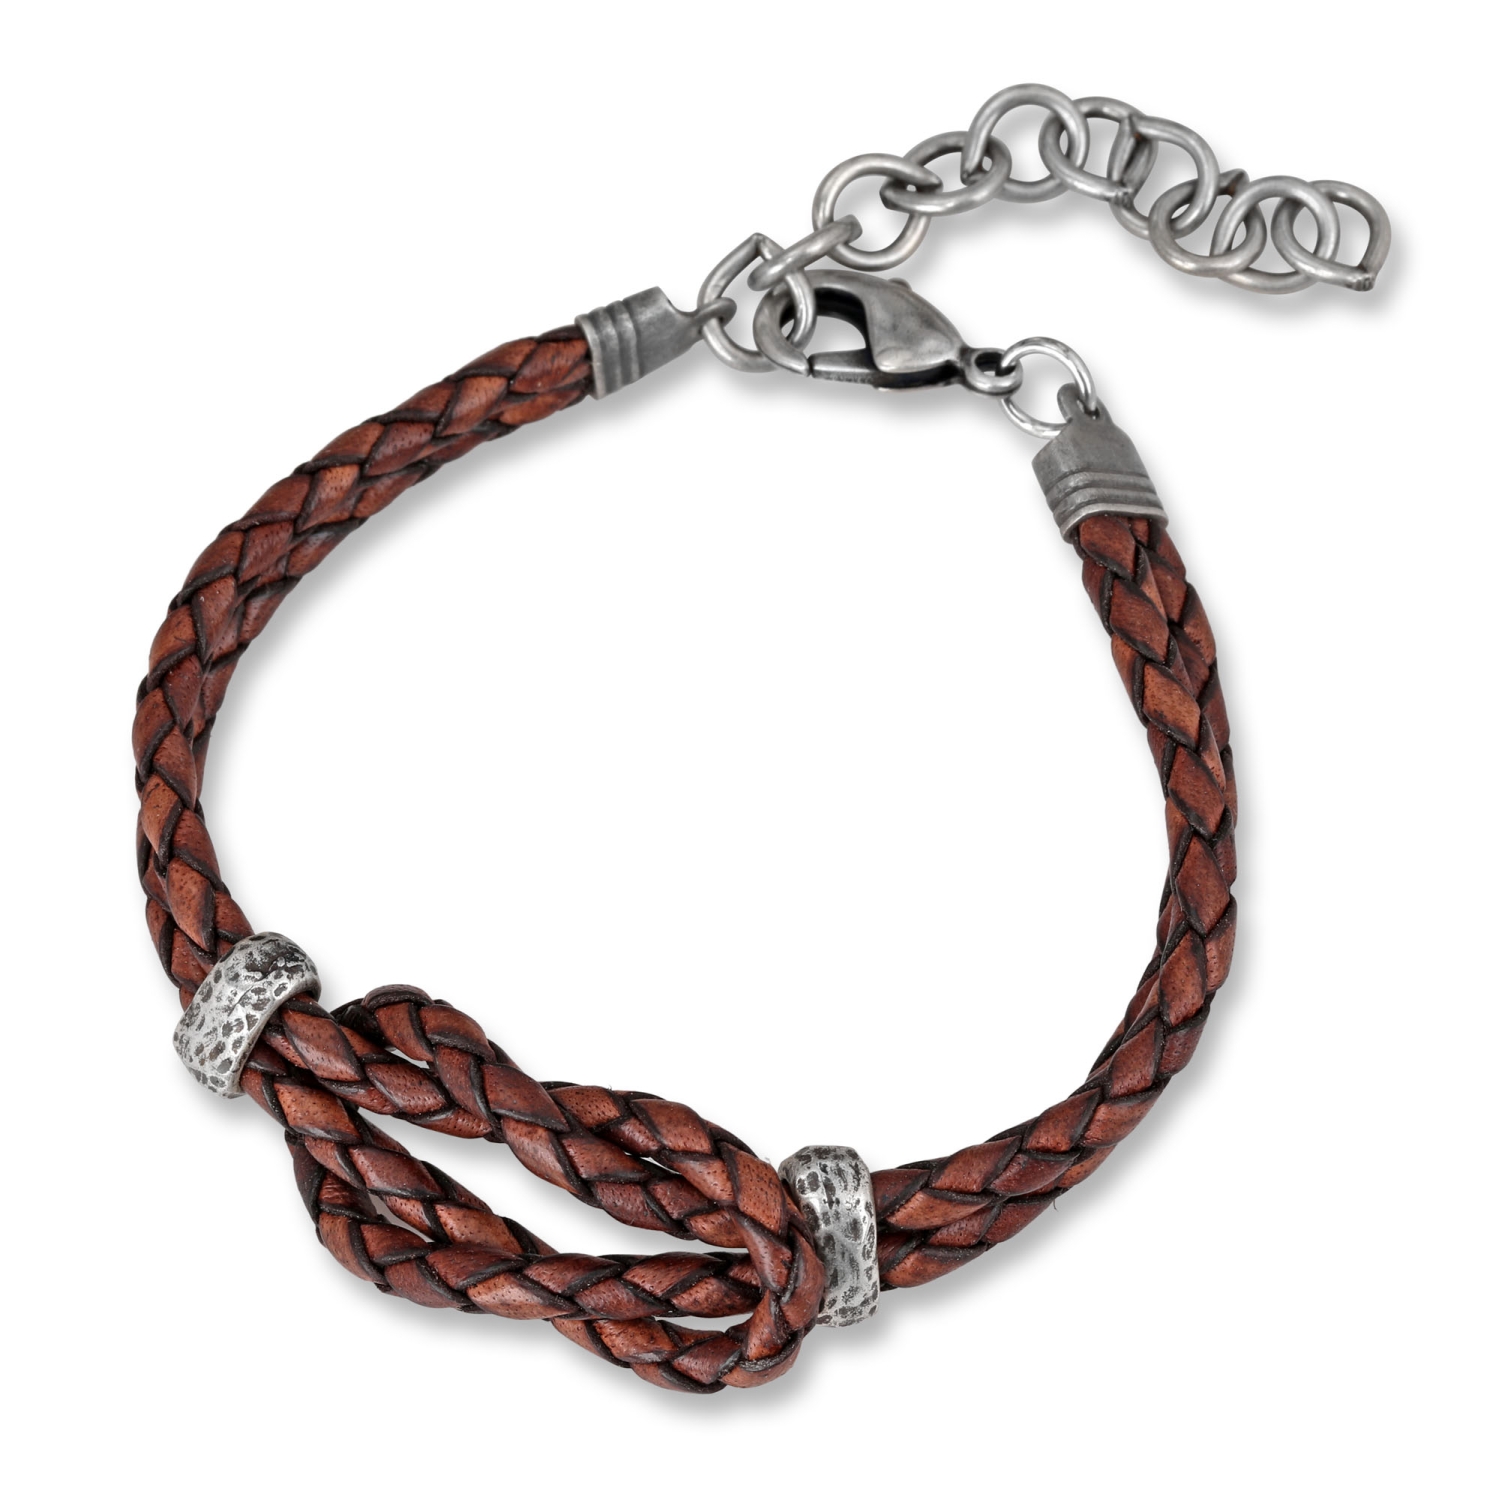 Galis Jewelry Double Strand Knotted Brown Leather Men’s Bracelet - 2